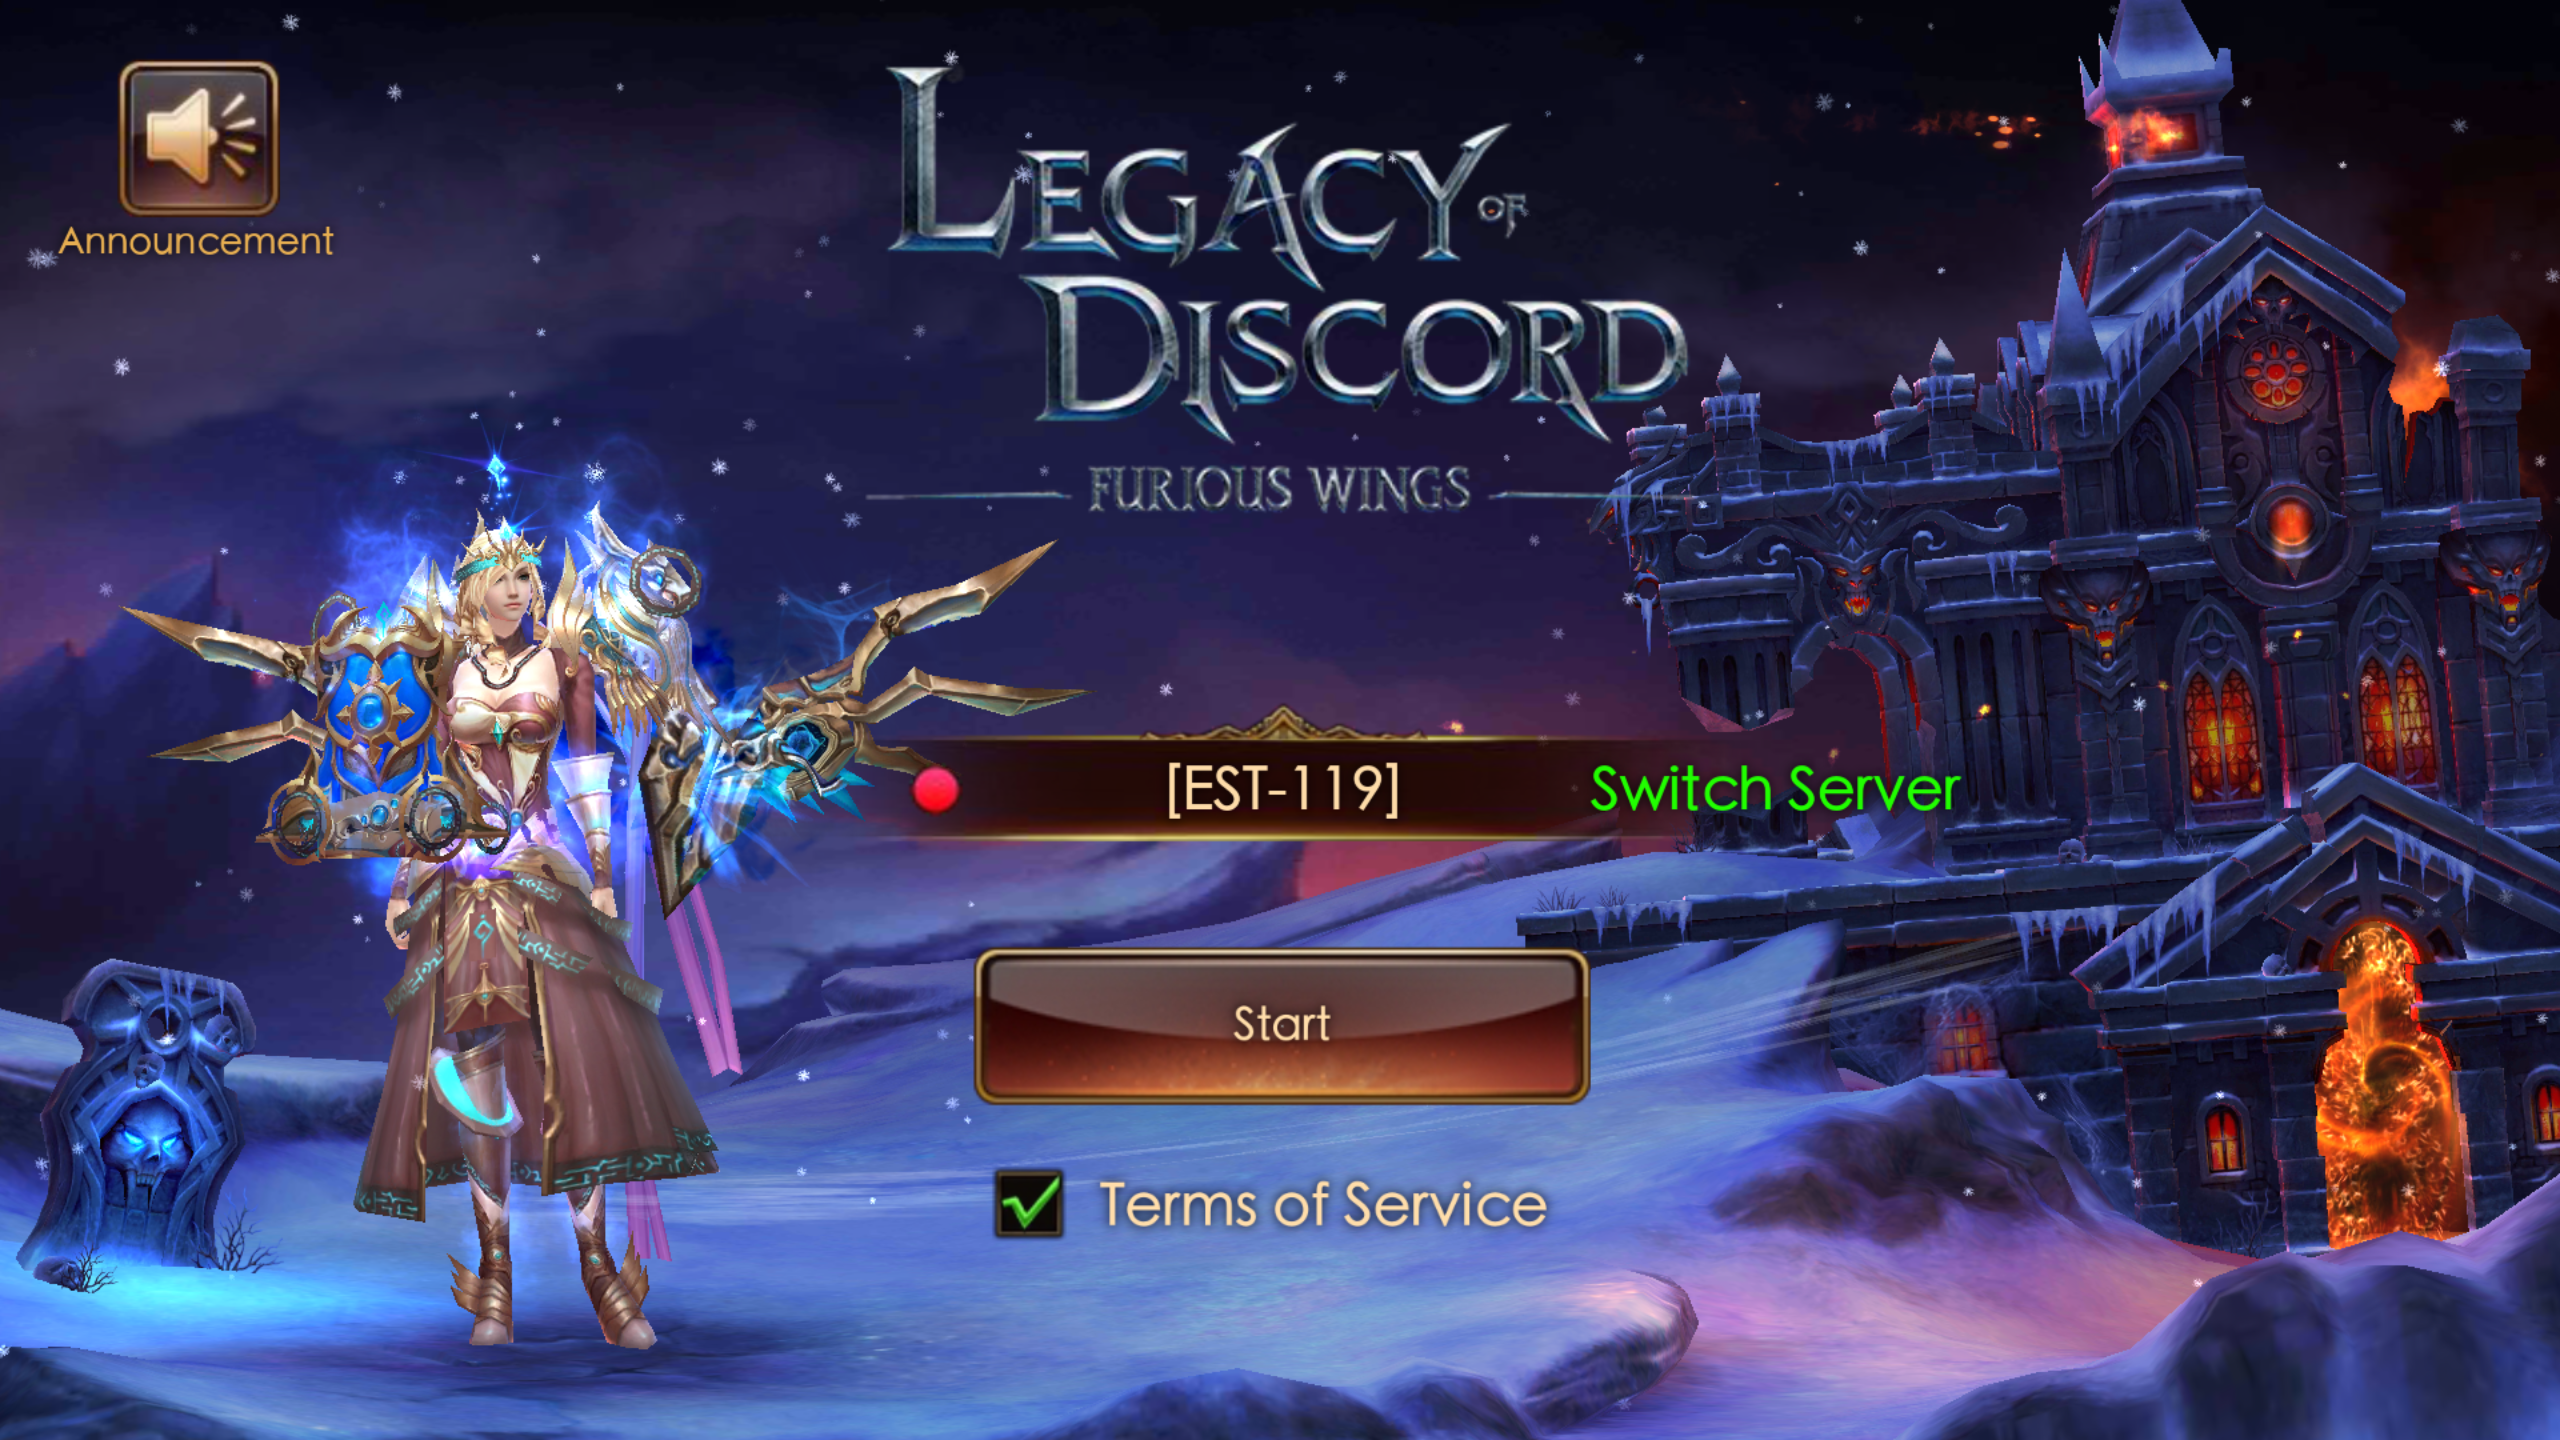 Legacy of Discord - Furious Wings - We're excited to see some